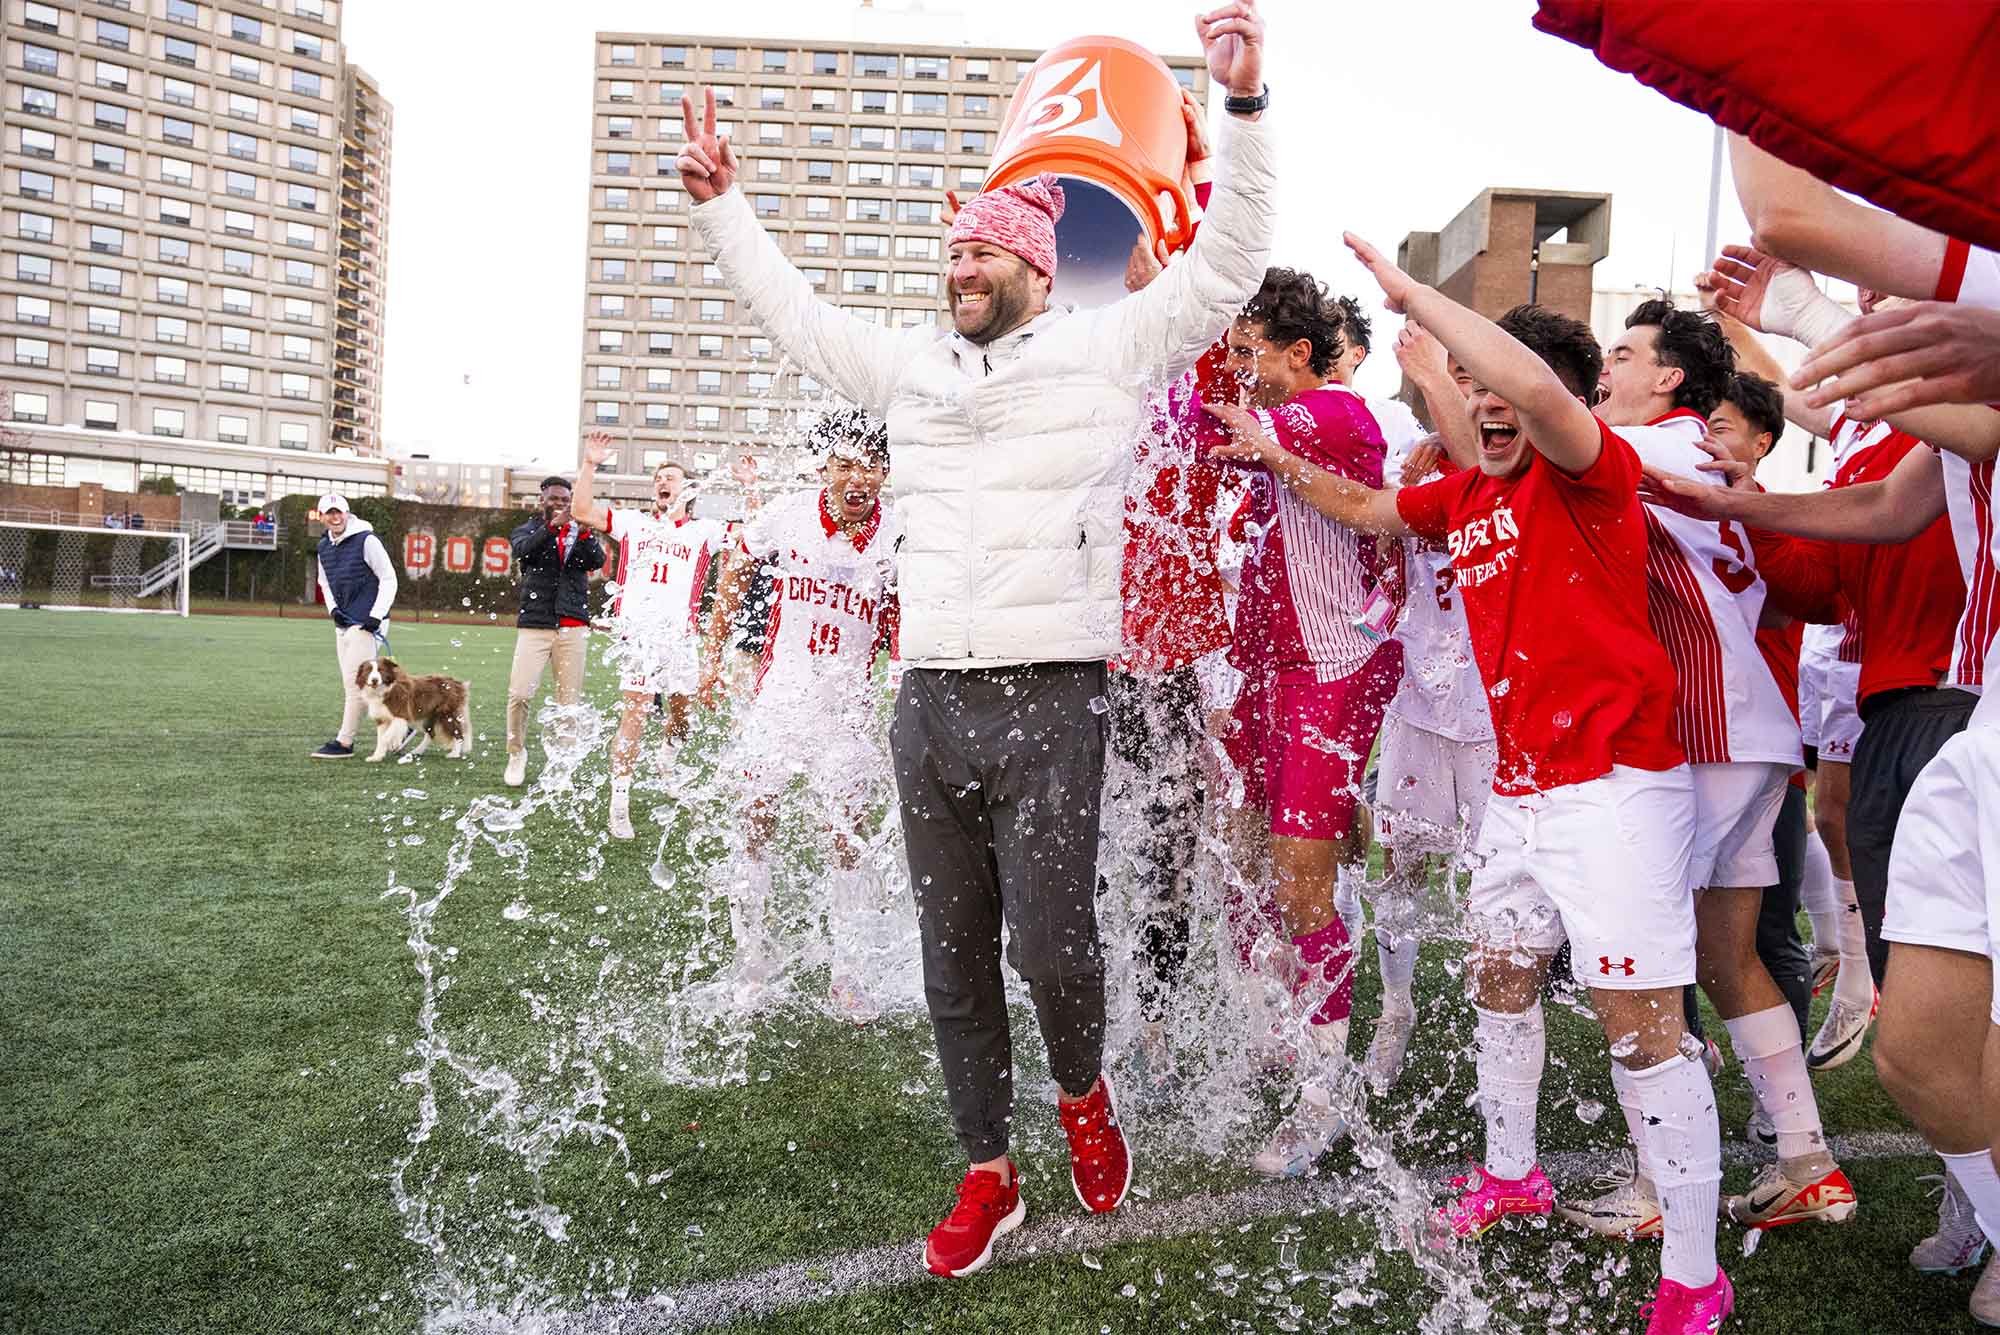 Photo: Coach of the BU Men's Soccer team receives a drenching of Gatorade to the back after winning the patriot league title